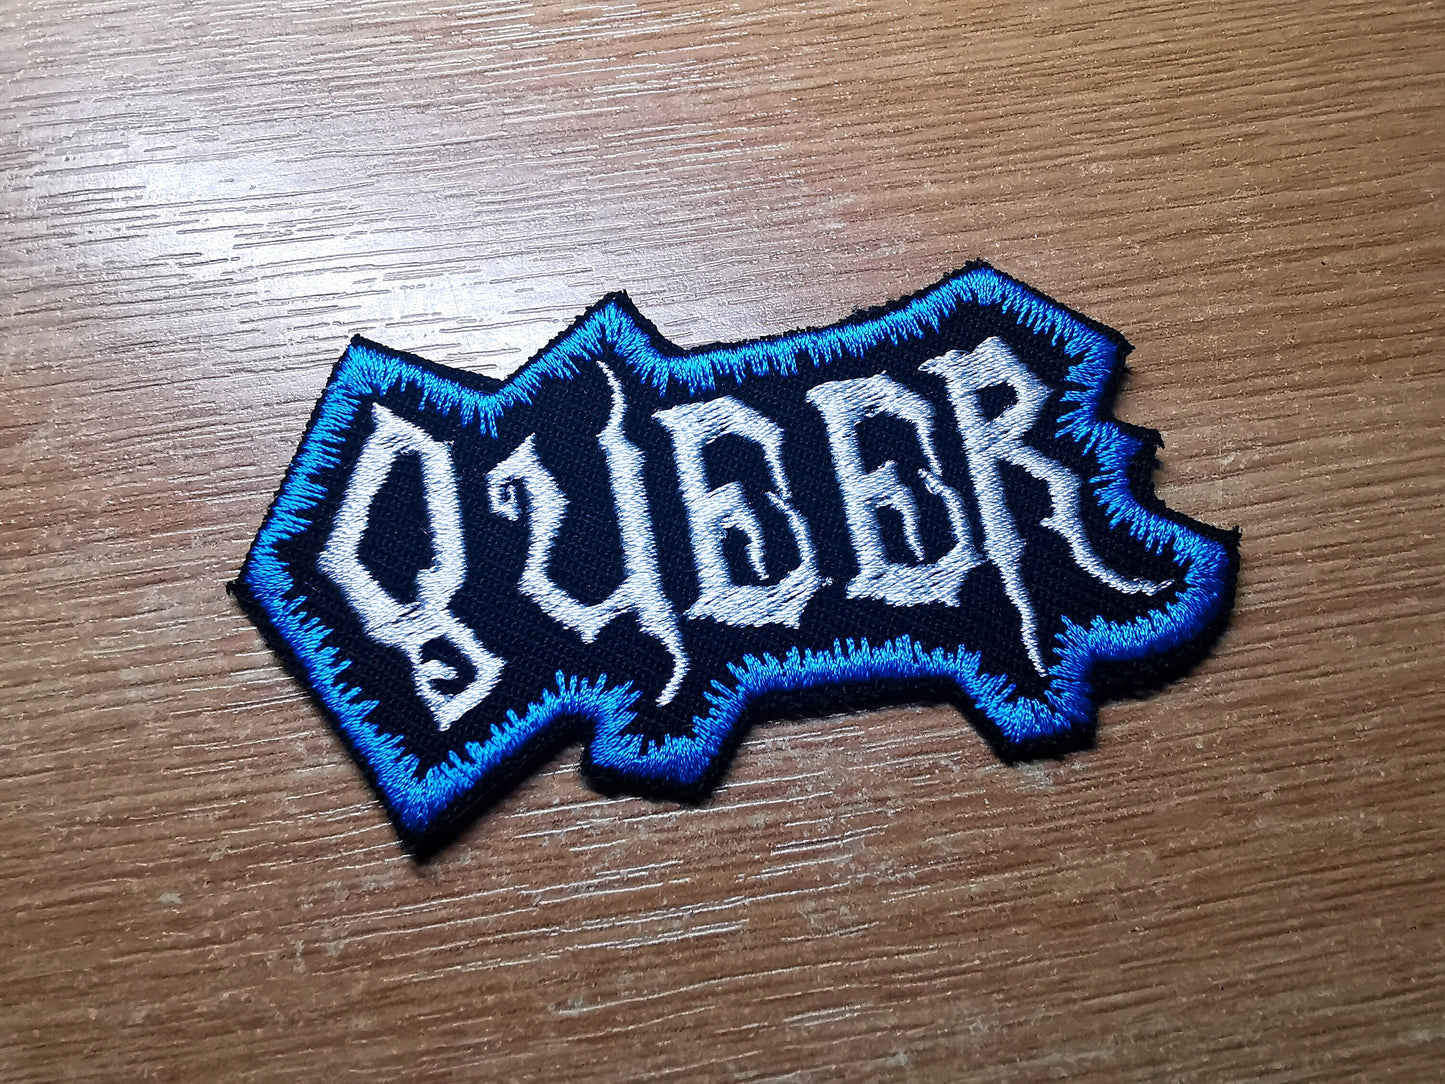 Queer Gothic LGBTQ+ Iron On Patch Pride Embroidered Patches